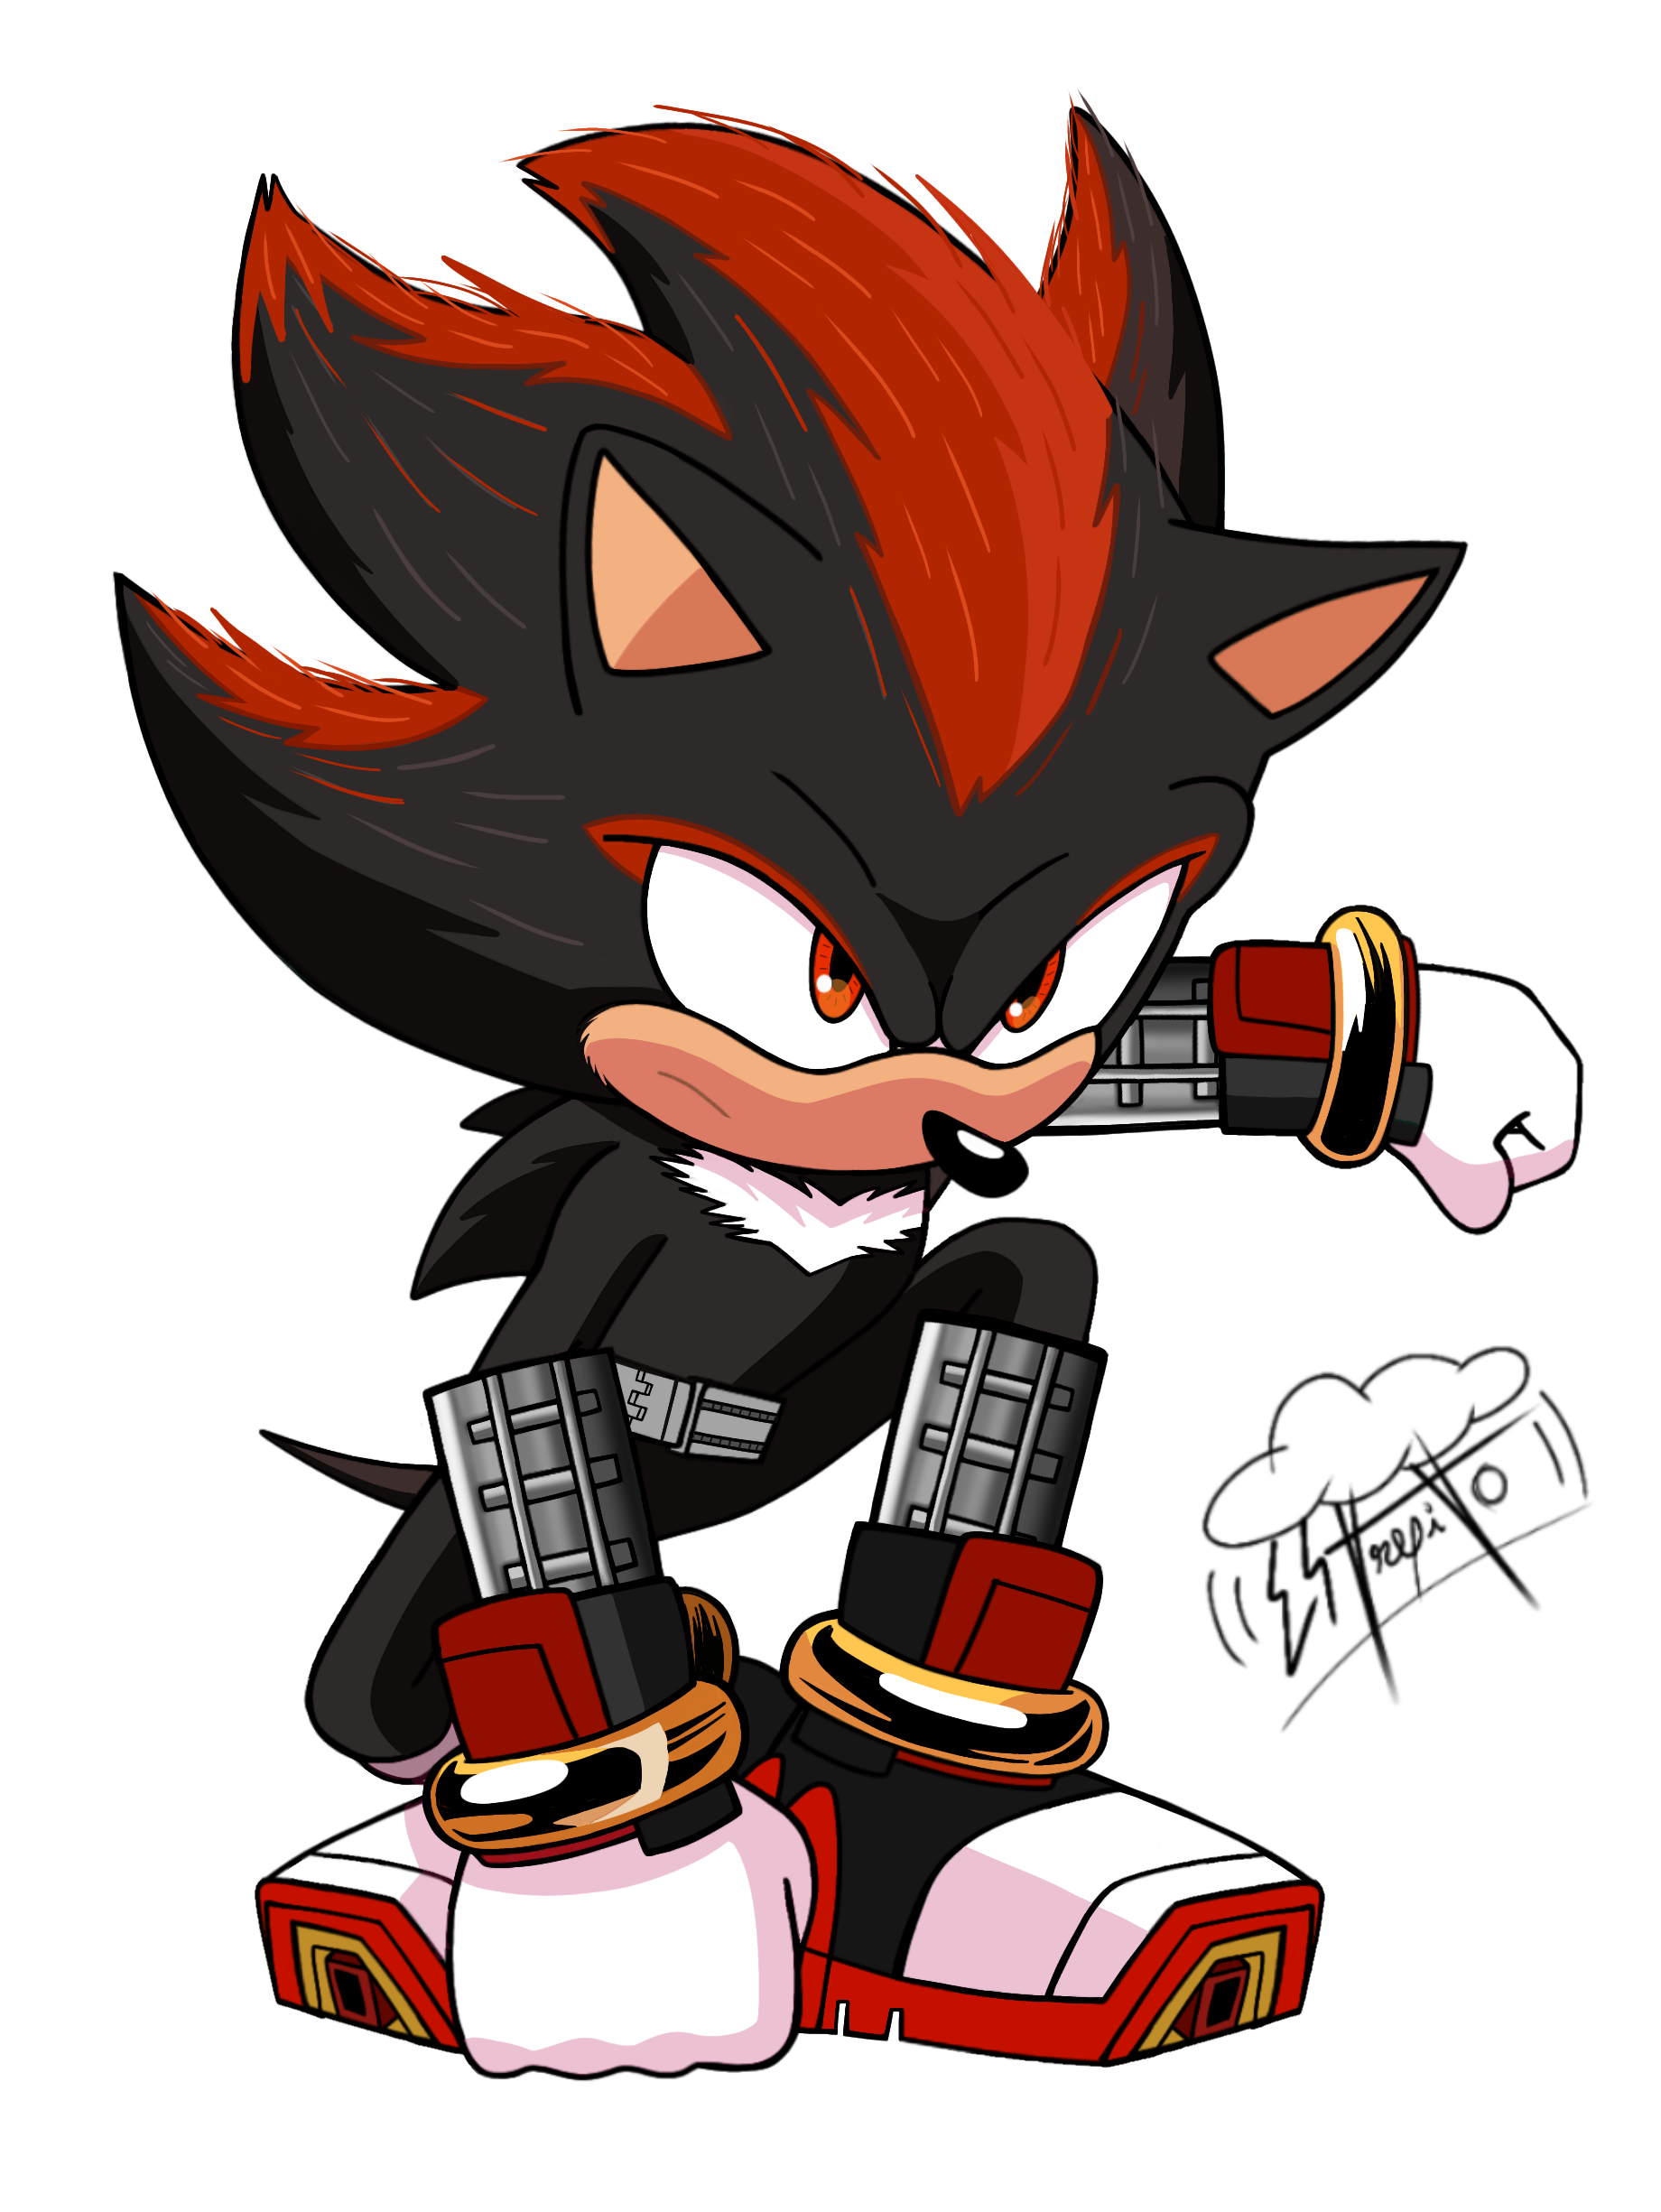 Shadow the Hedgehog in Sonic Movie 2020 art style by Toon-Romantic on  DeviantArt